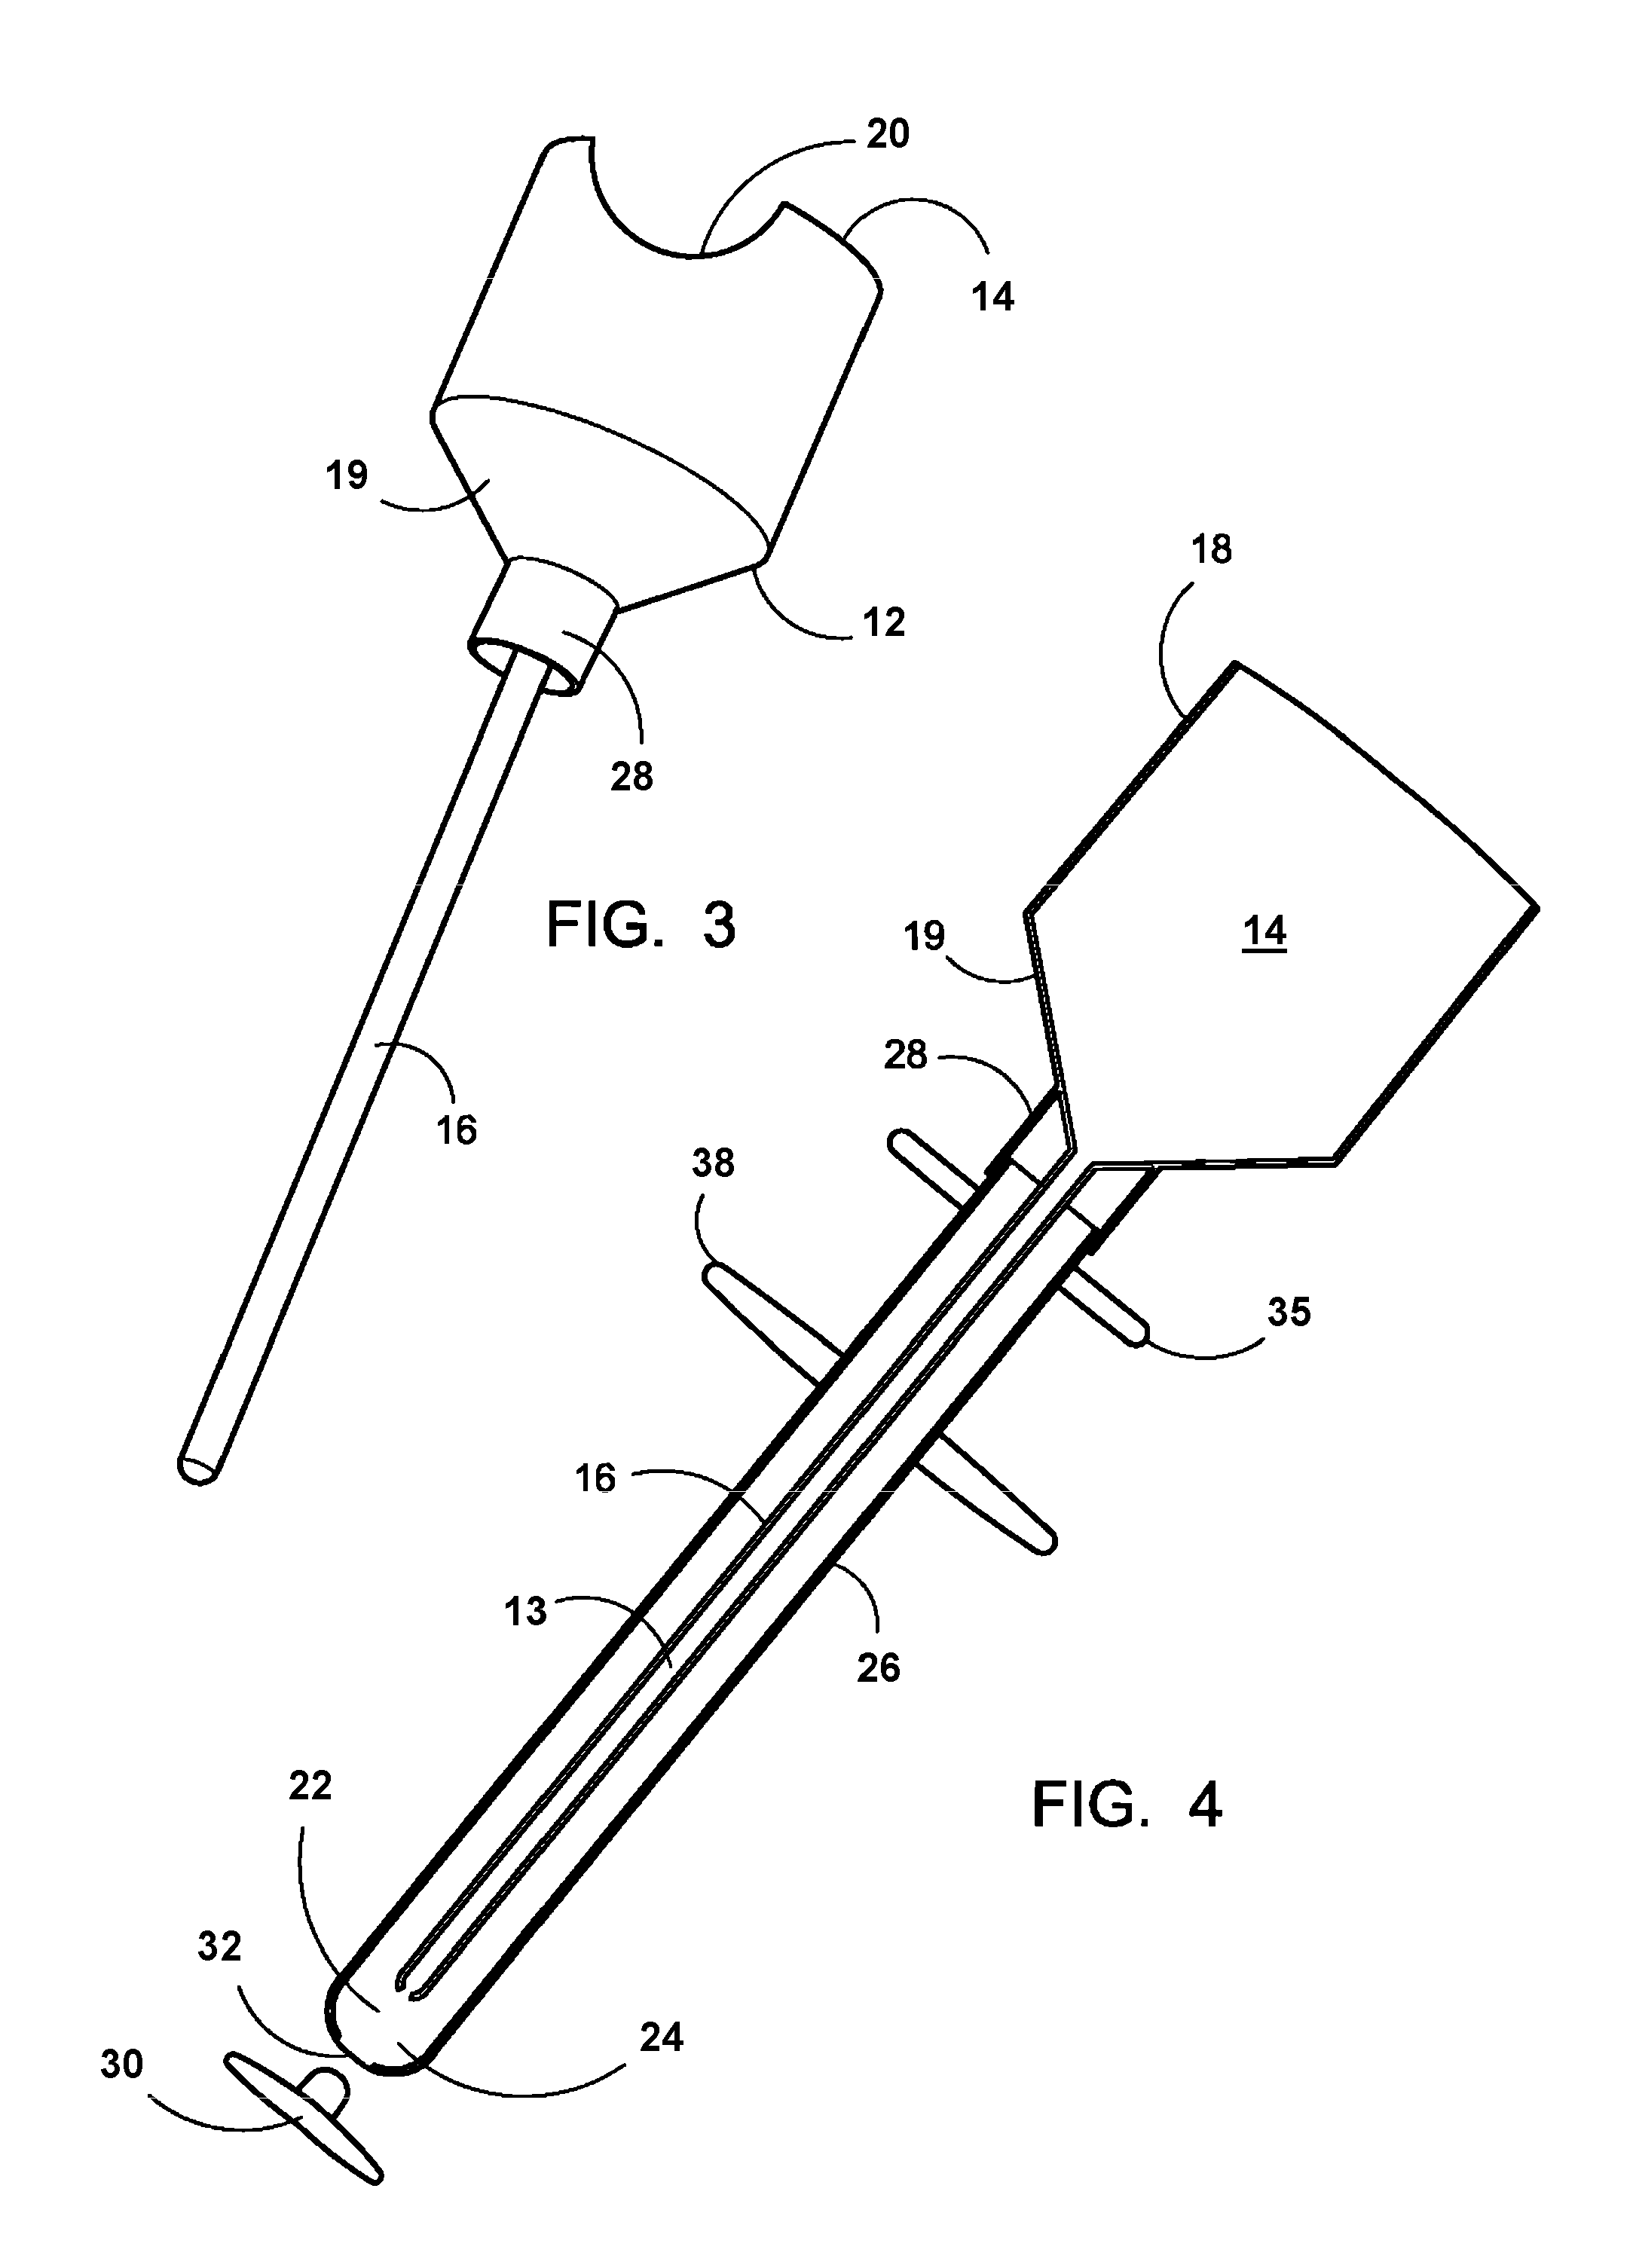 Reproductive infusion device